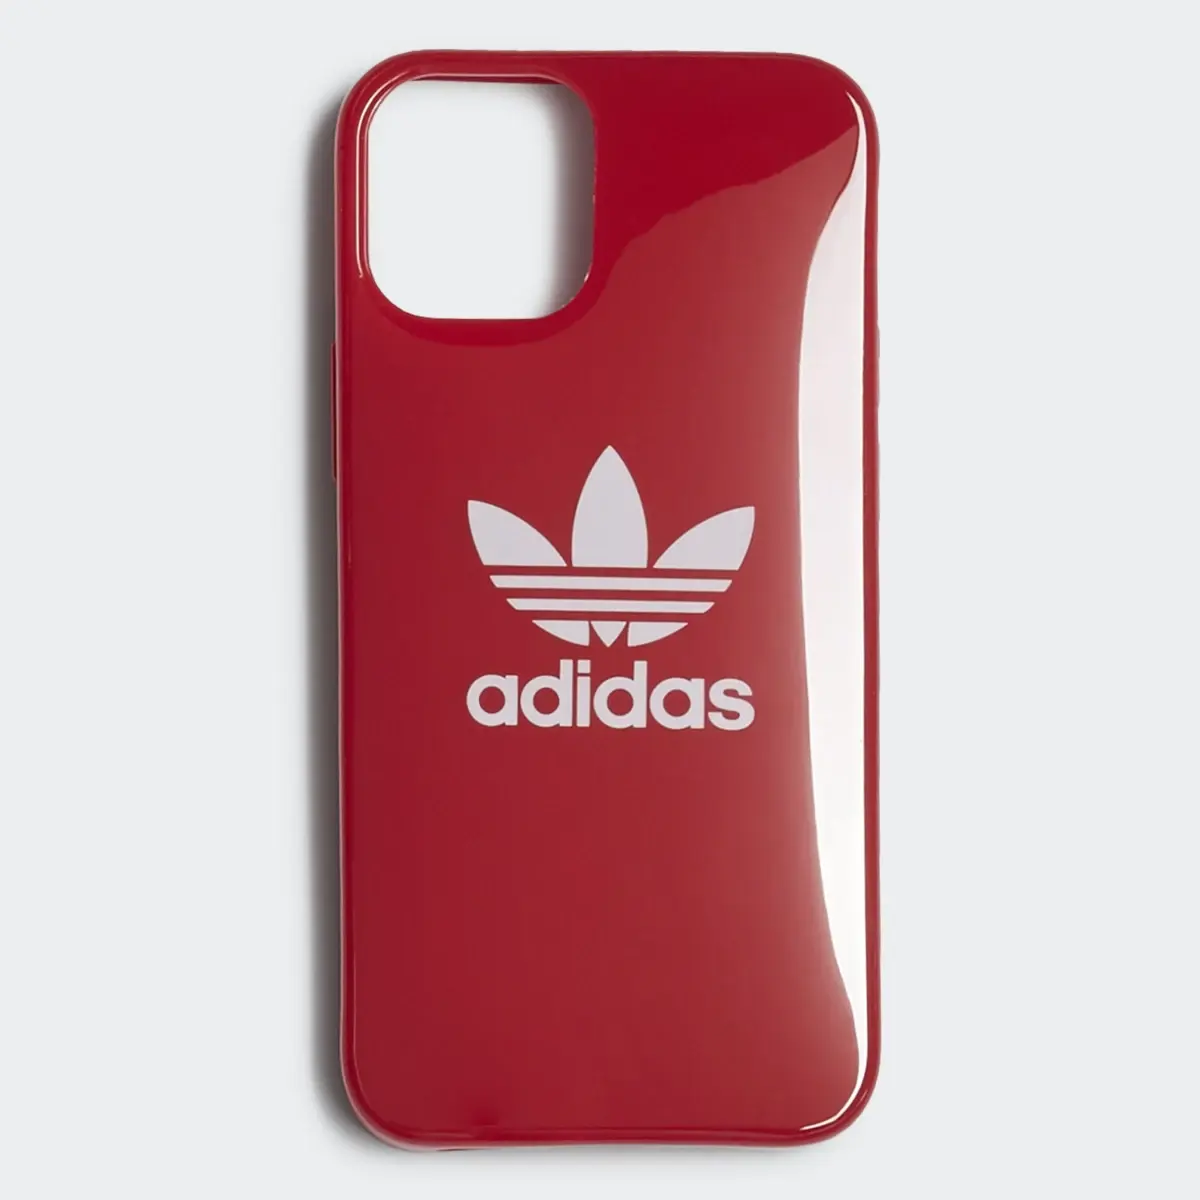 Adidas Moulded Snap for iPhone 12 mini. 2